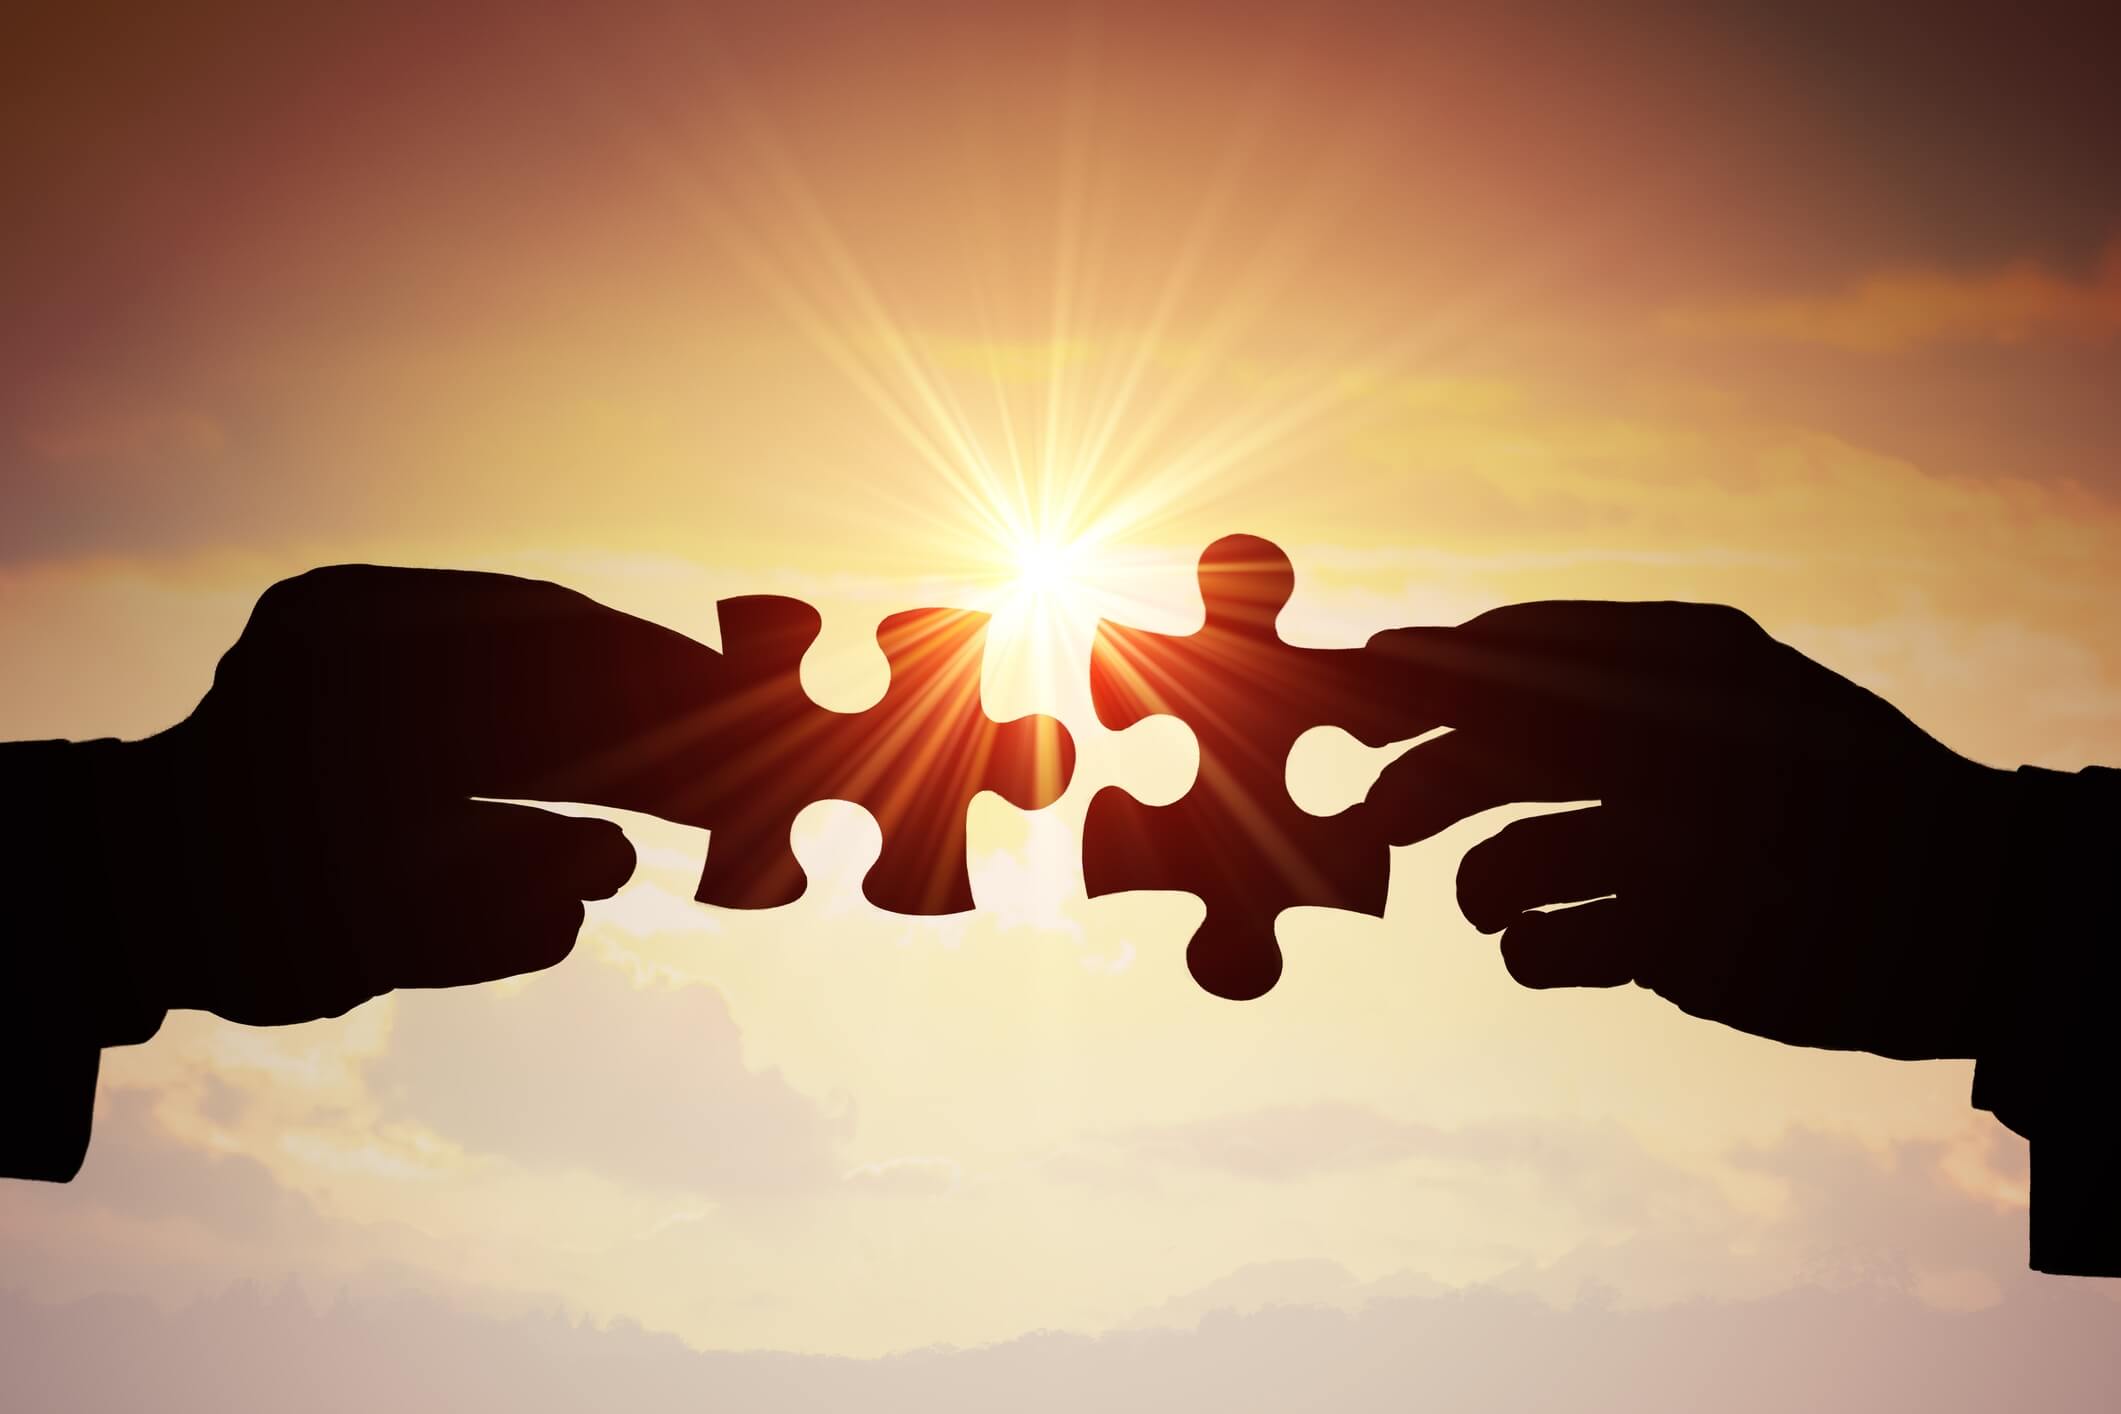 2 hands holding puzzle pieces fitting them together with the sun shining in the background.